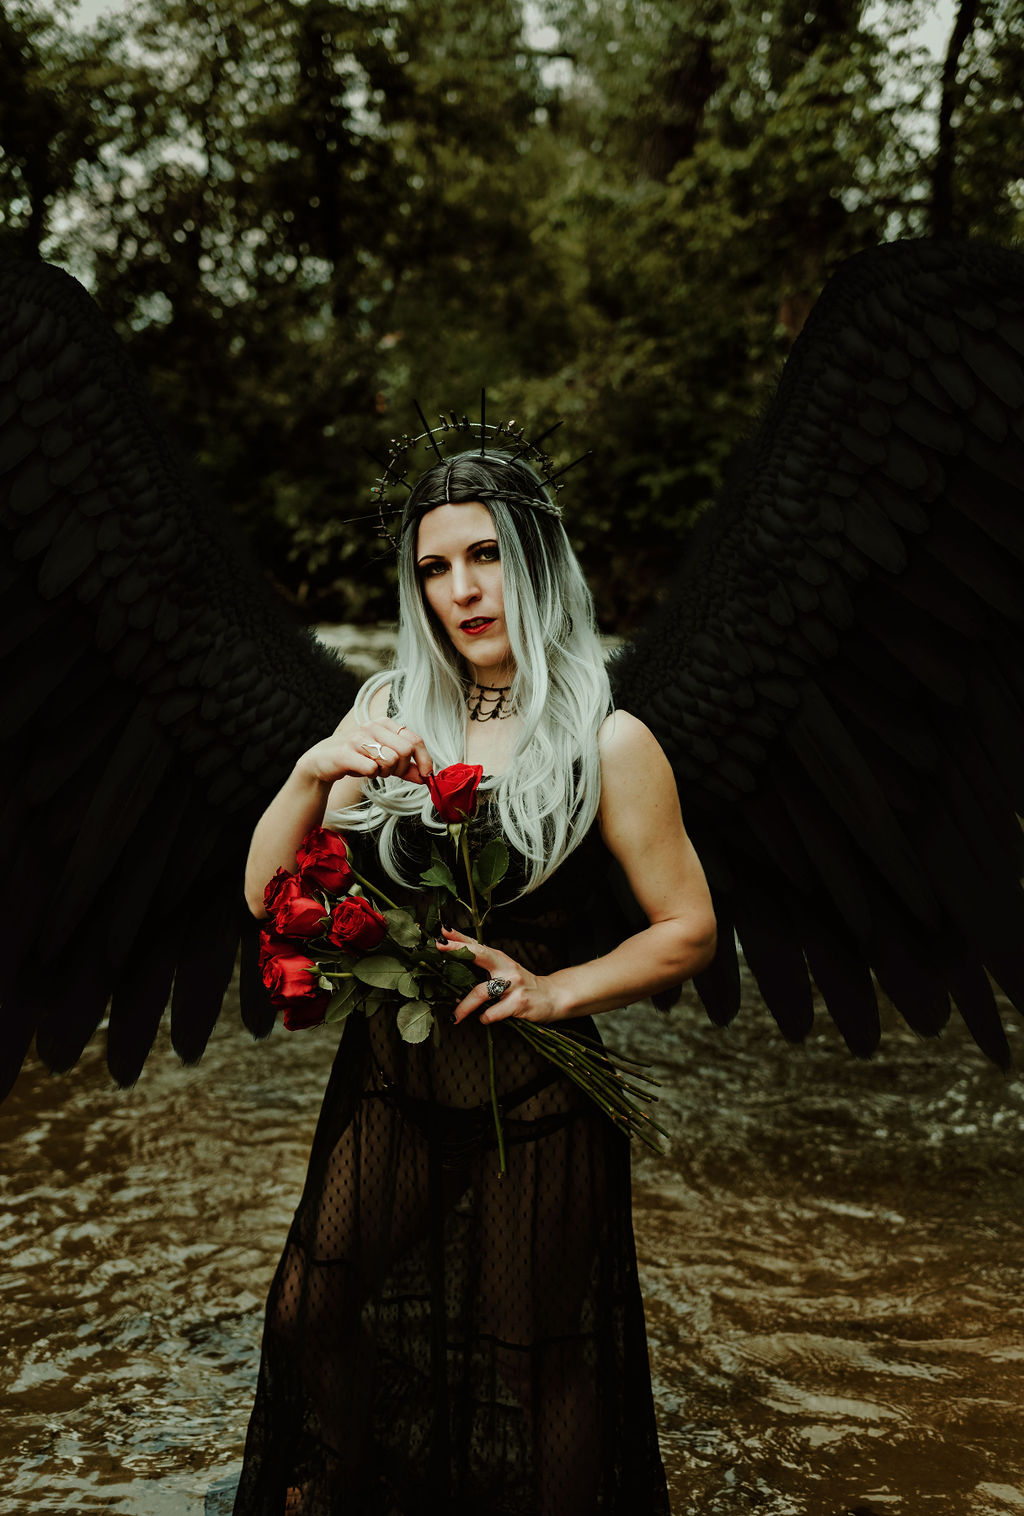 Kendra Colleen Photography takes fantasy image of a woman with large black wings holding a bouquet of red roses with a river and forest in the background.